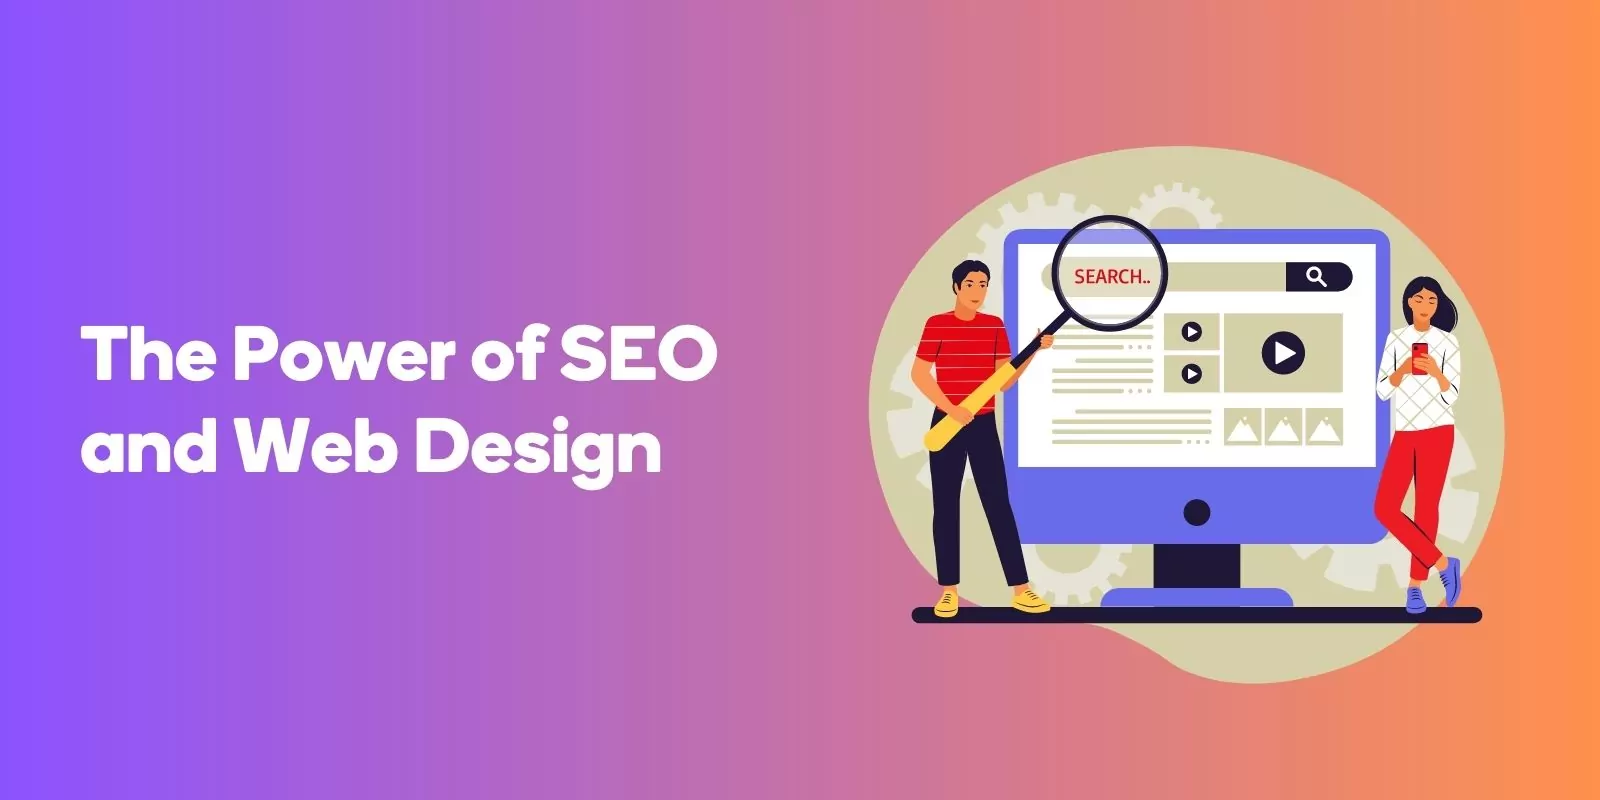 The Power of SEO and Web Design